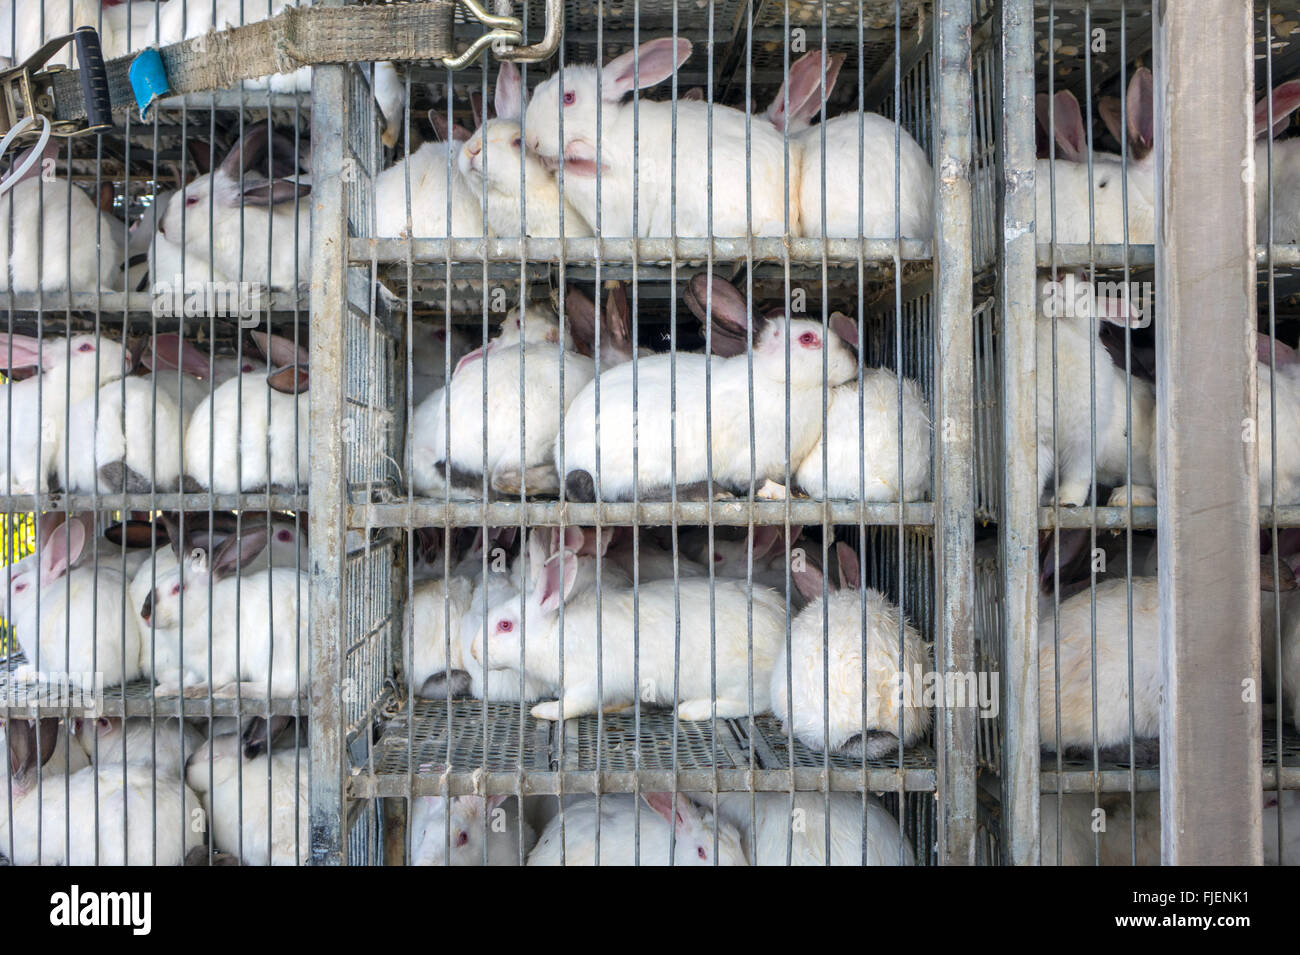 Large number of farmed white rabbits in cages for transportation Stock Photo